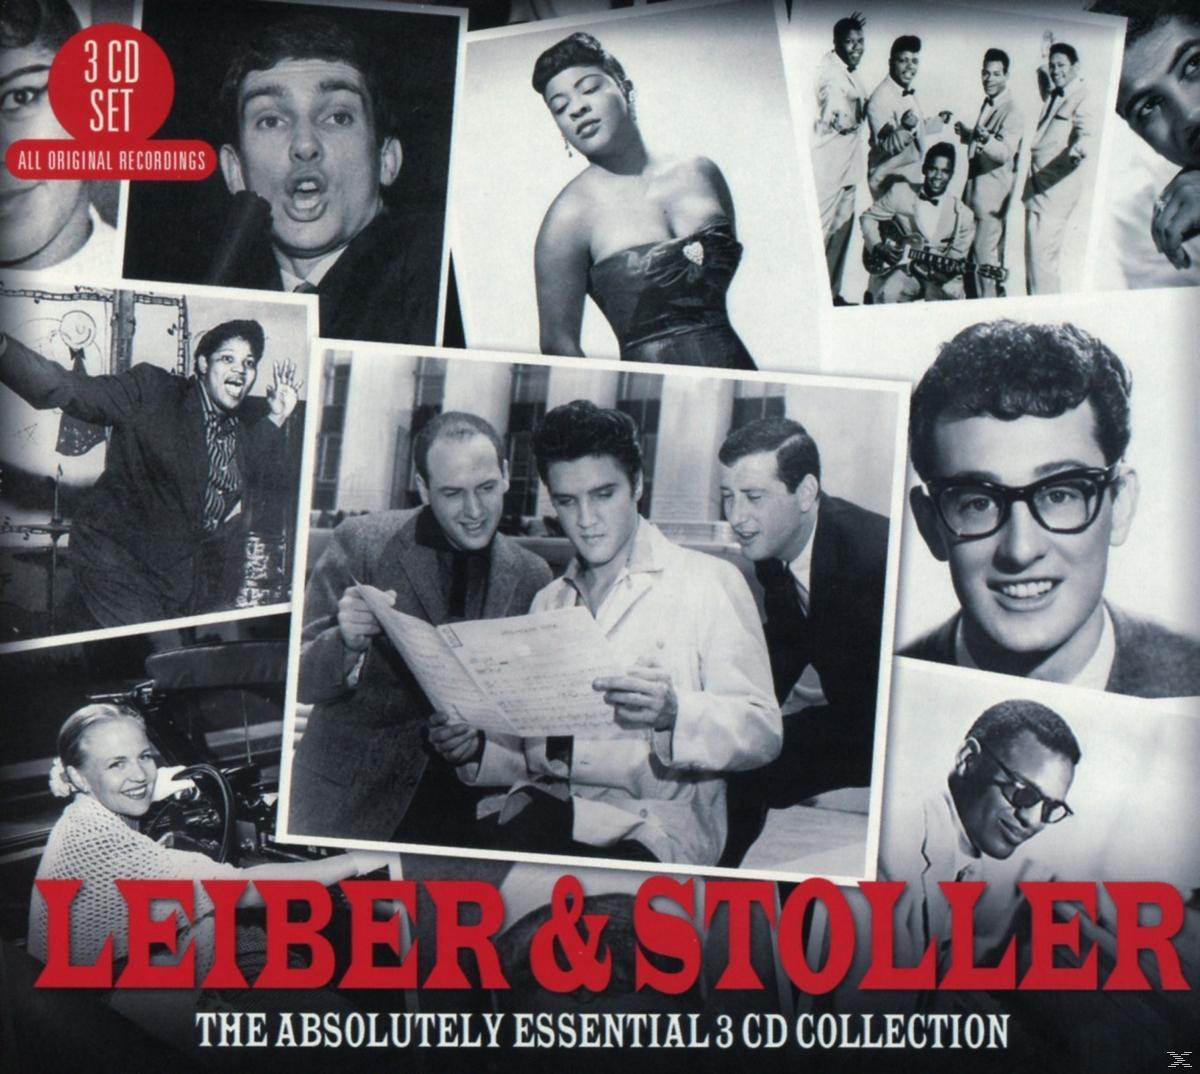 Leiber & Stoller - Cd - Collection 3 The (CD) Essential Absolutely